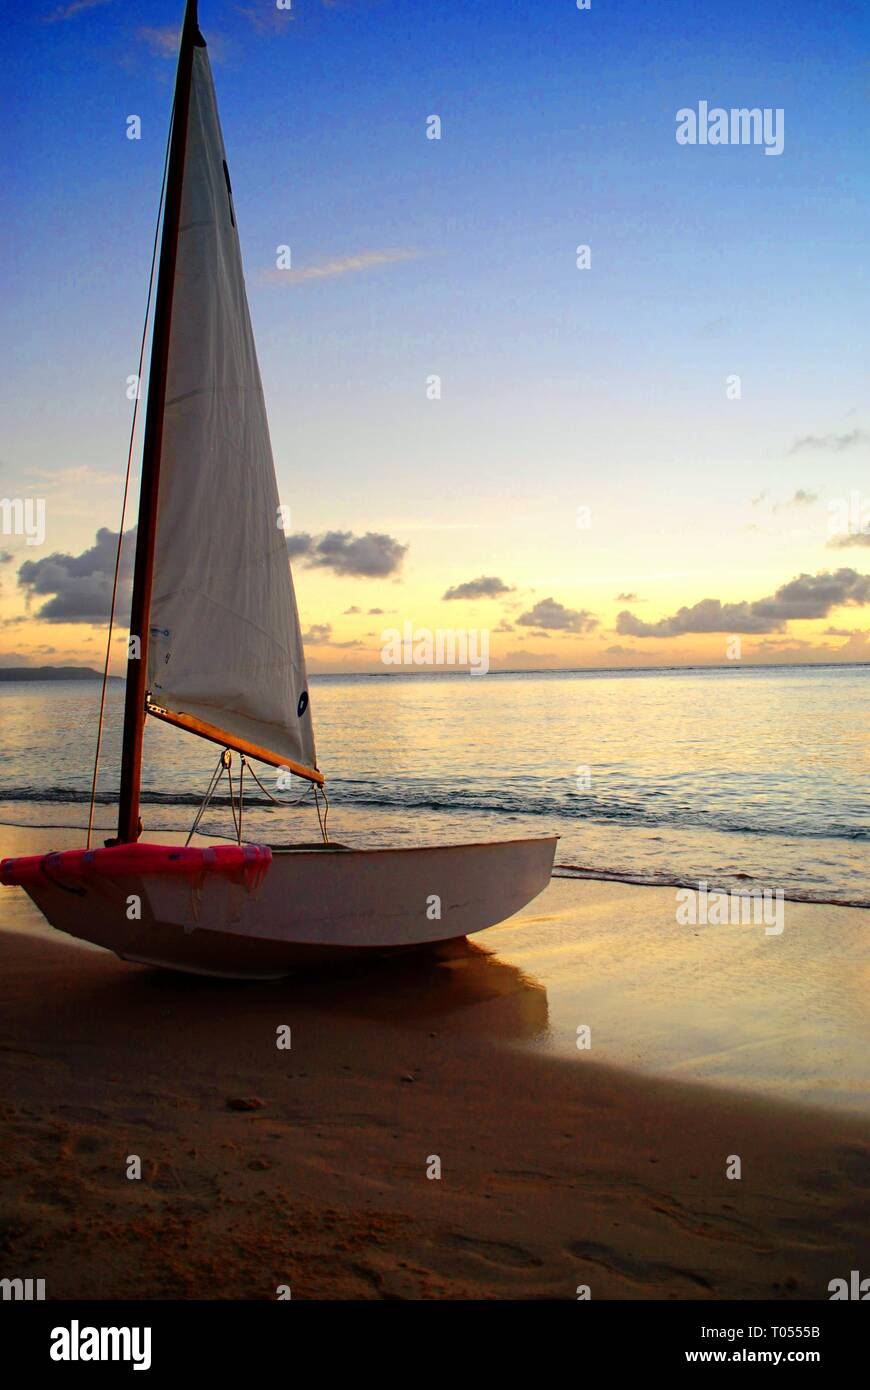 Sailboat docked on the shores of a beach at sunset Stock Photo